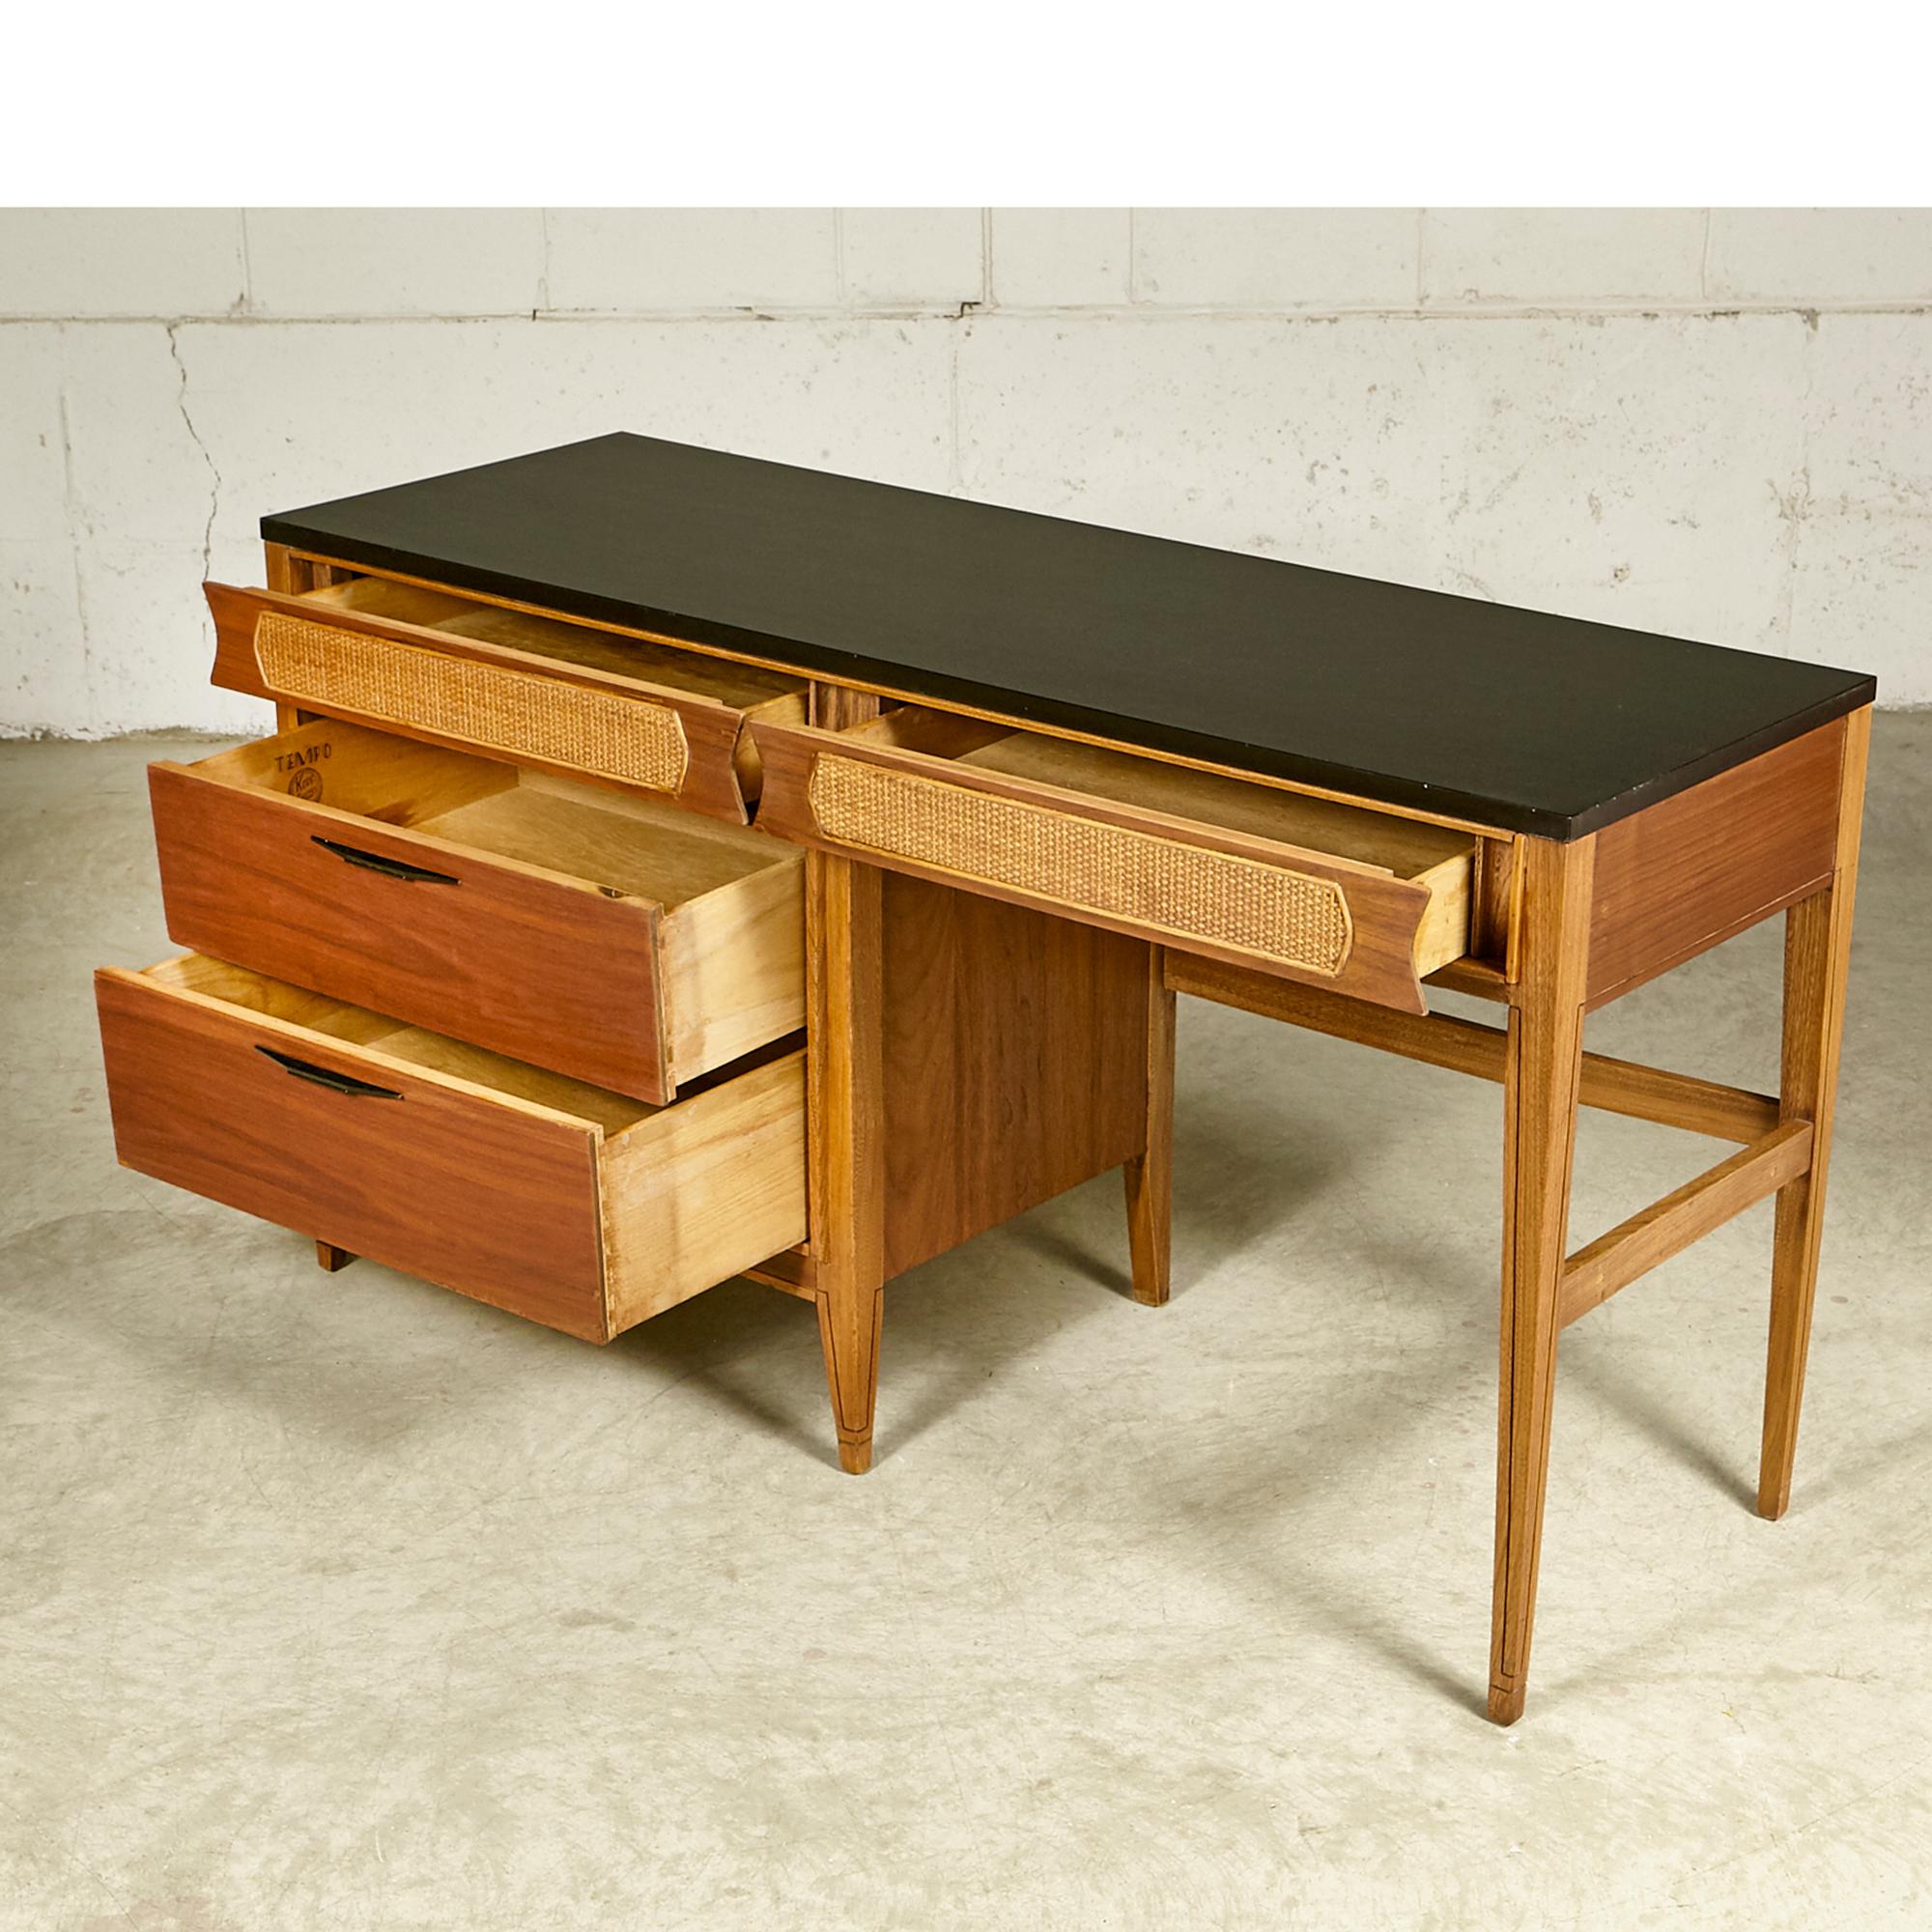 Kent Coffey Walnut Tempo Desk 1960s For Sale At 1stdibs